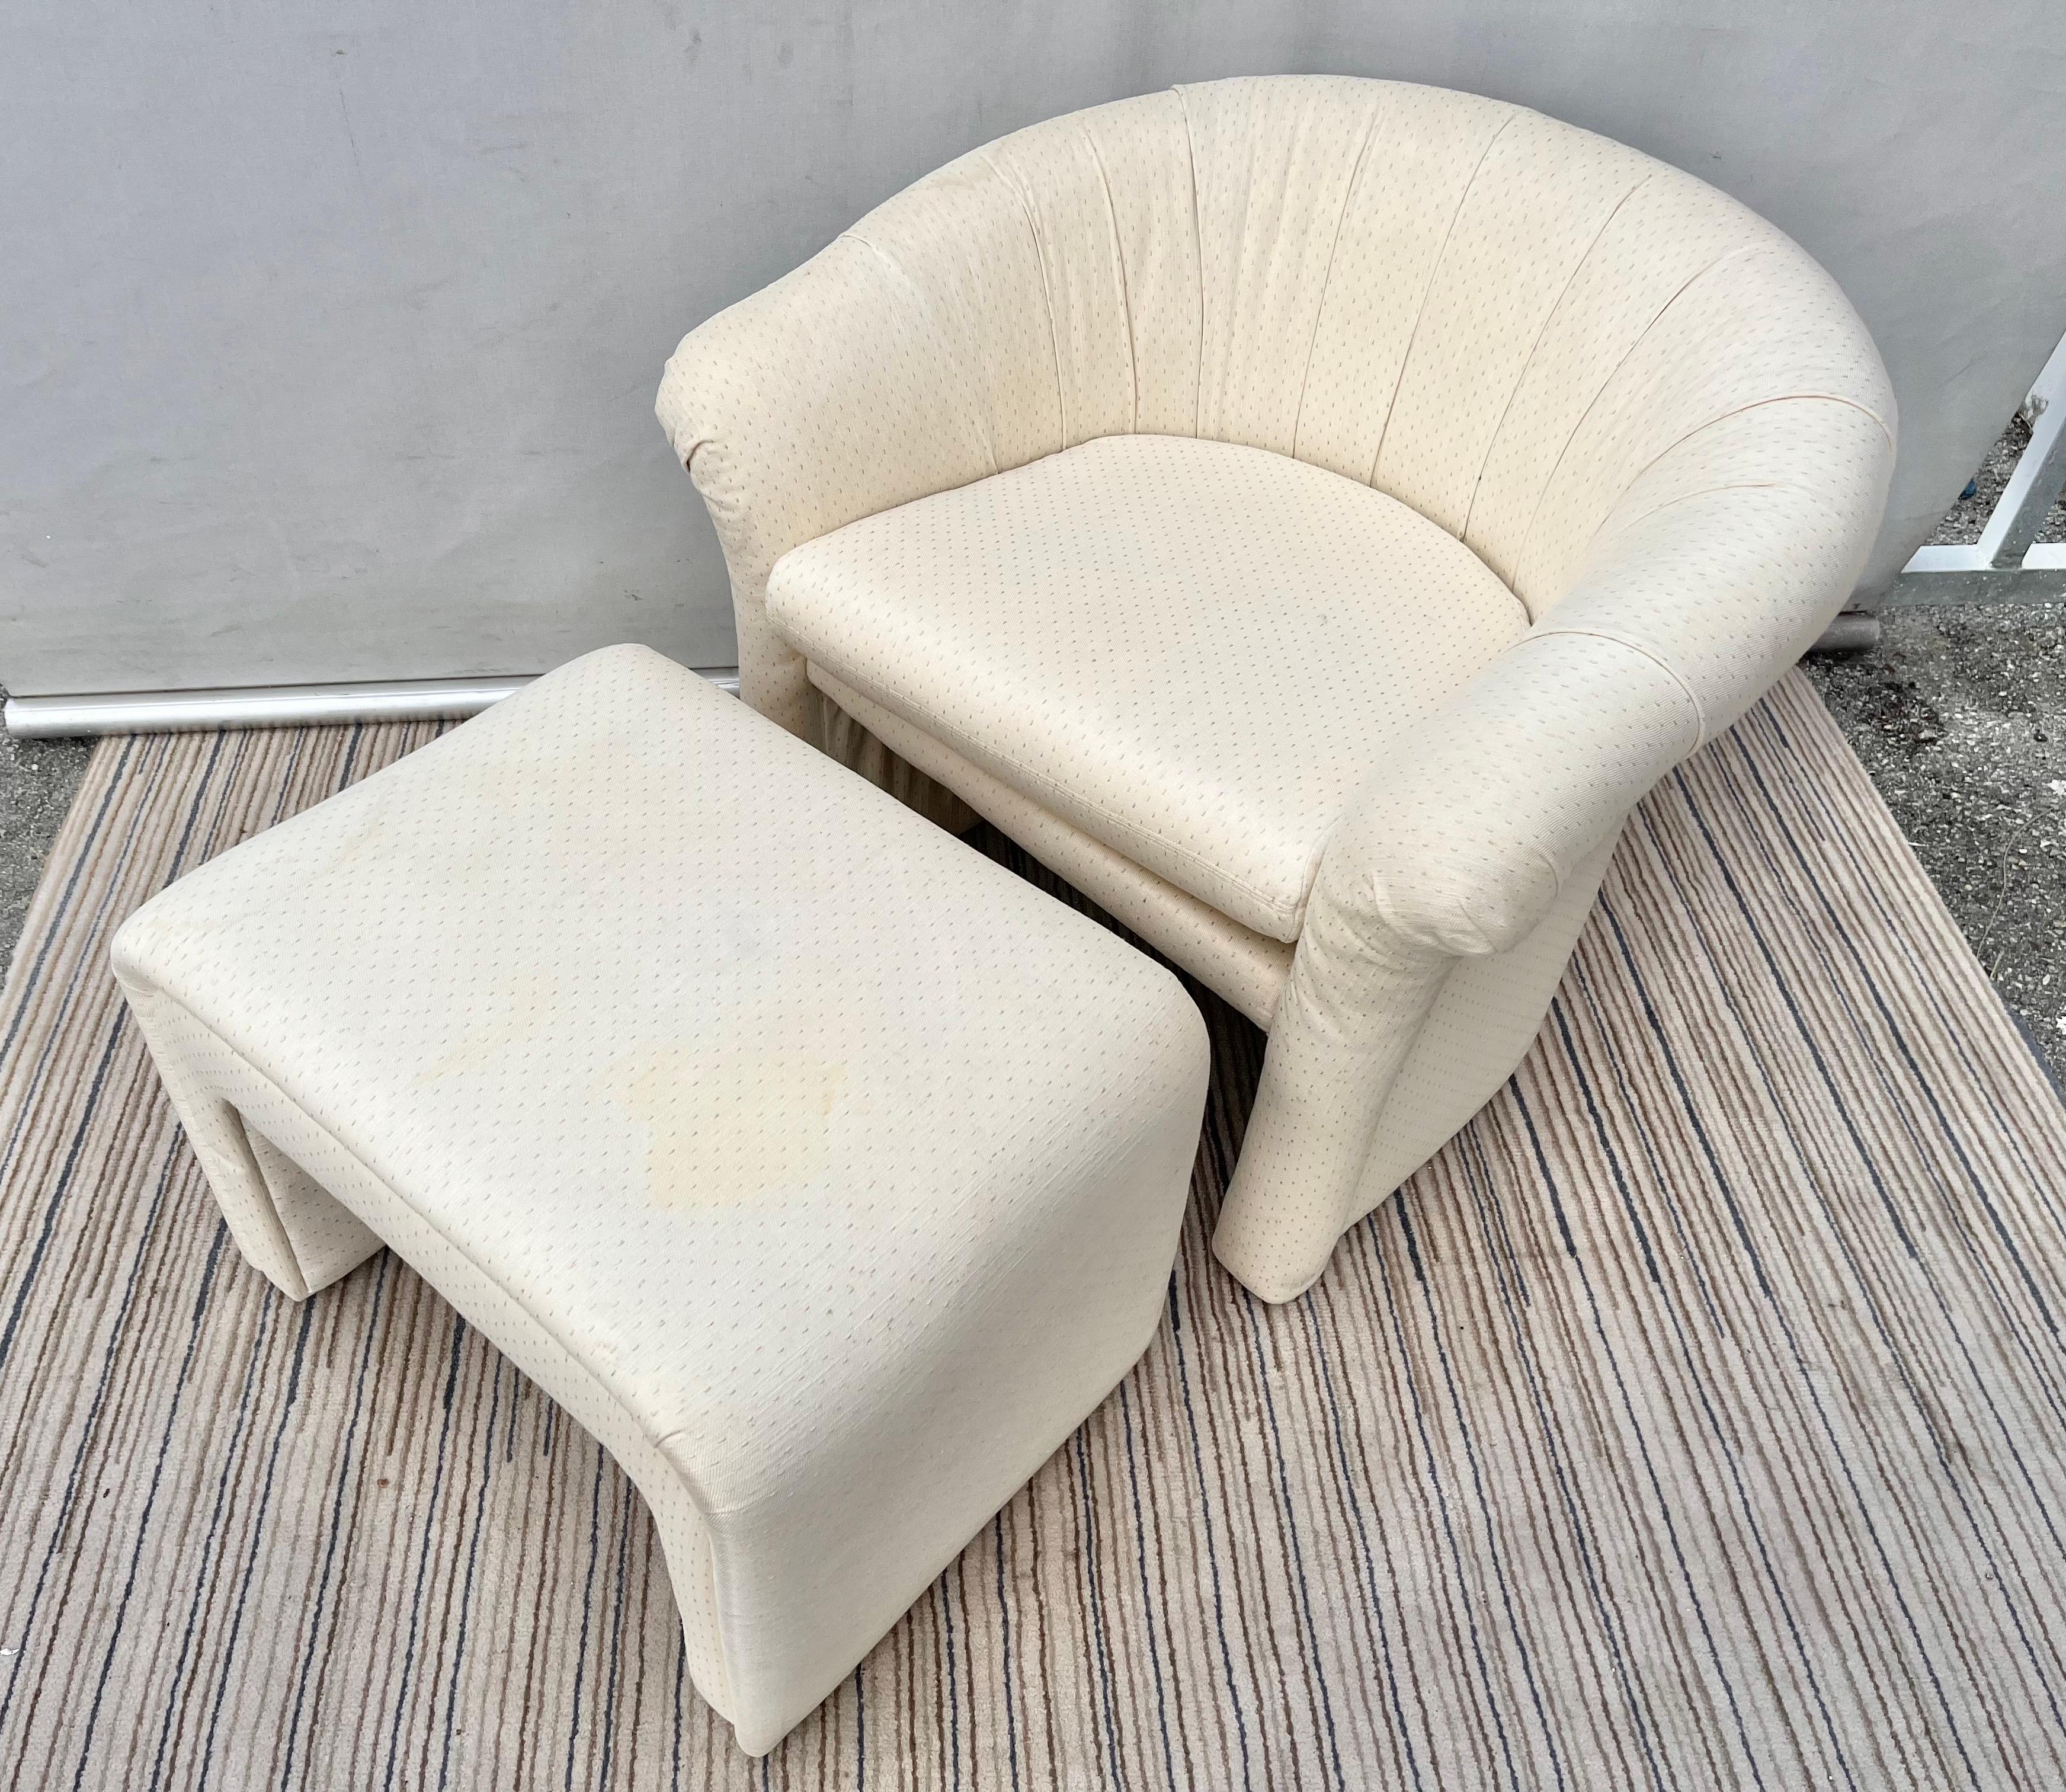 1980s Art Deco Revival Upholstered Lounge Chair with Ottoman by Thayer Coggin In Good Condition For Sale In Miami, FL